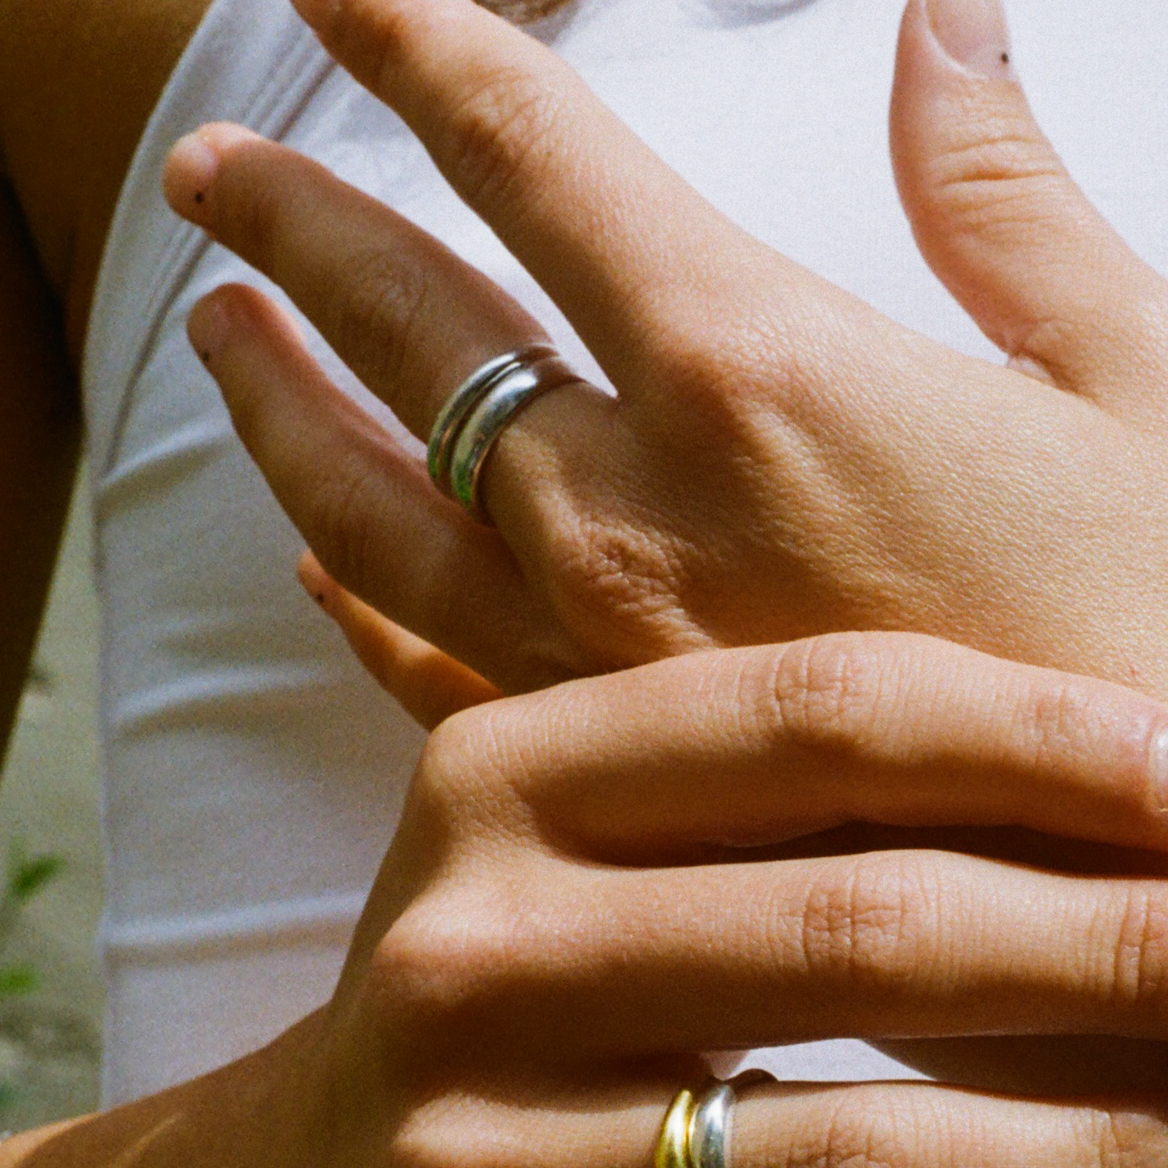 A close-up of a person's hands, showing a silver double-banded ring on the middle finger and a gold ring on the ring finger of one hand. The person is wearing a white sleeveless top and has minimalistic nail art with small black dots